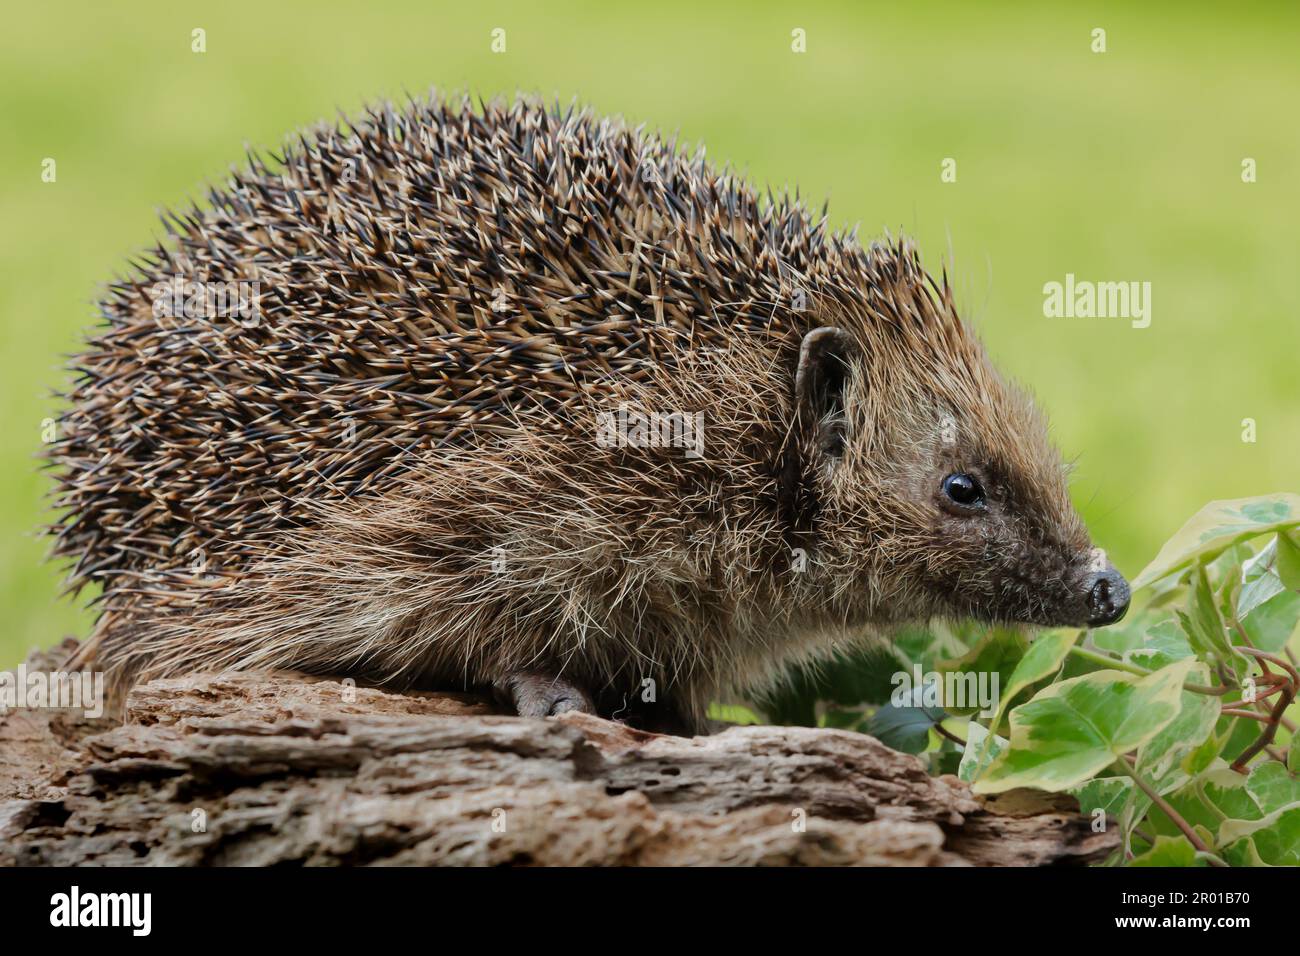 Close up of a wild, native European hedgehog foraging on a log and in green ivy.  Facing right. Clean background. Scientific name: Erinaceus Europaeus Stock Photo